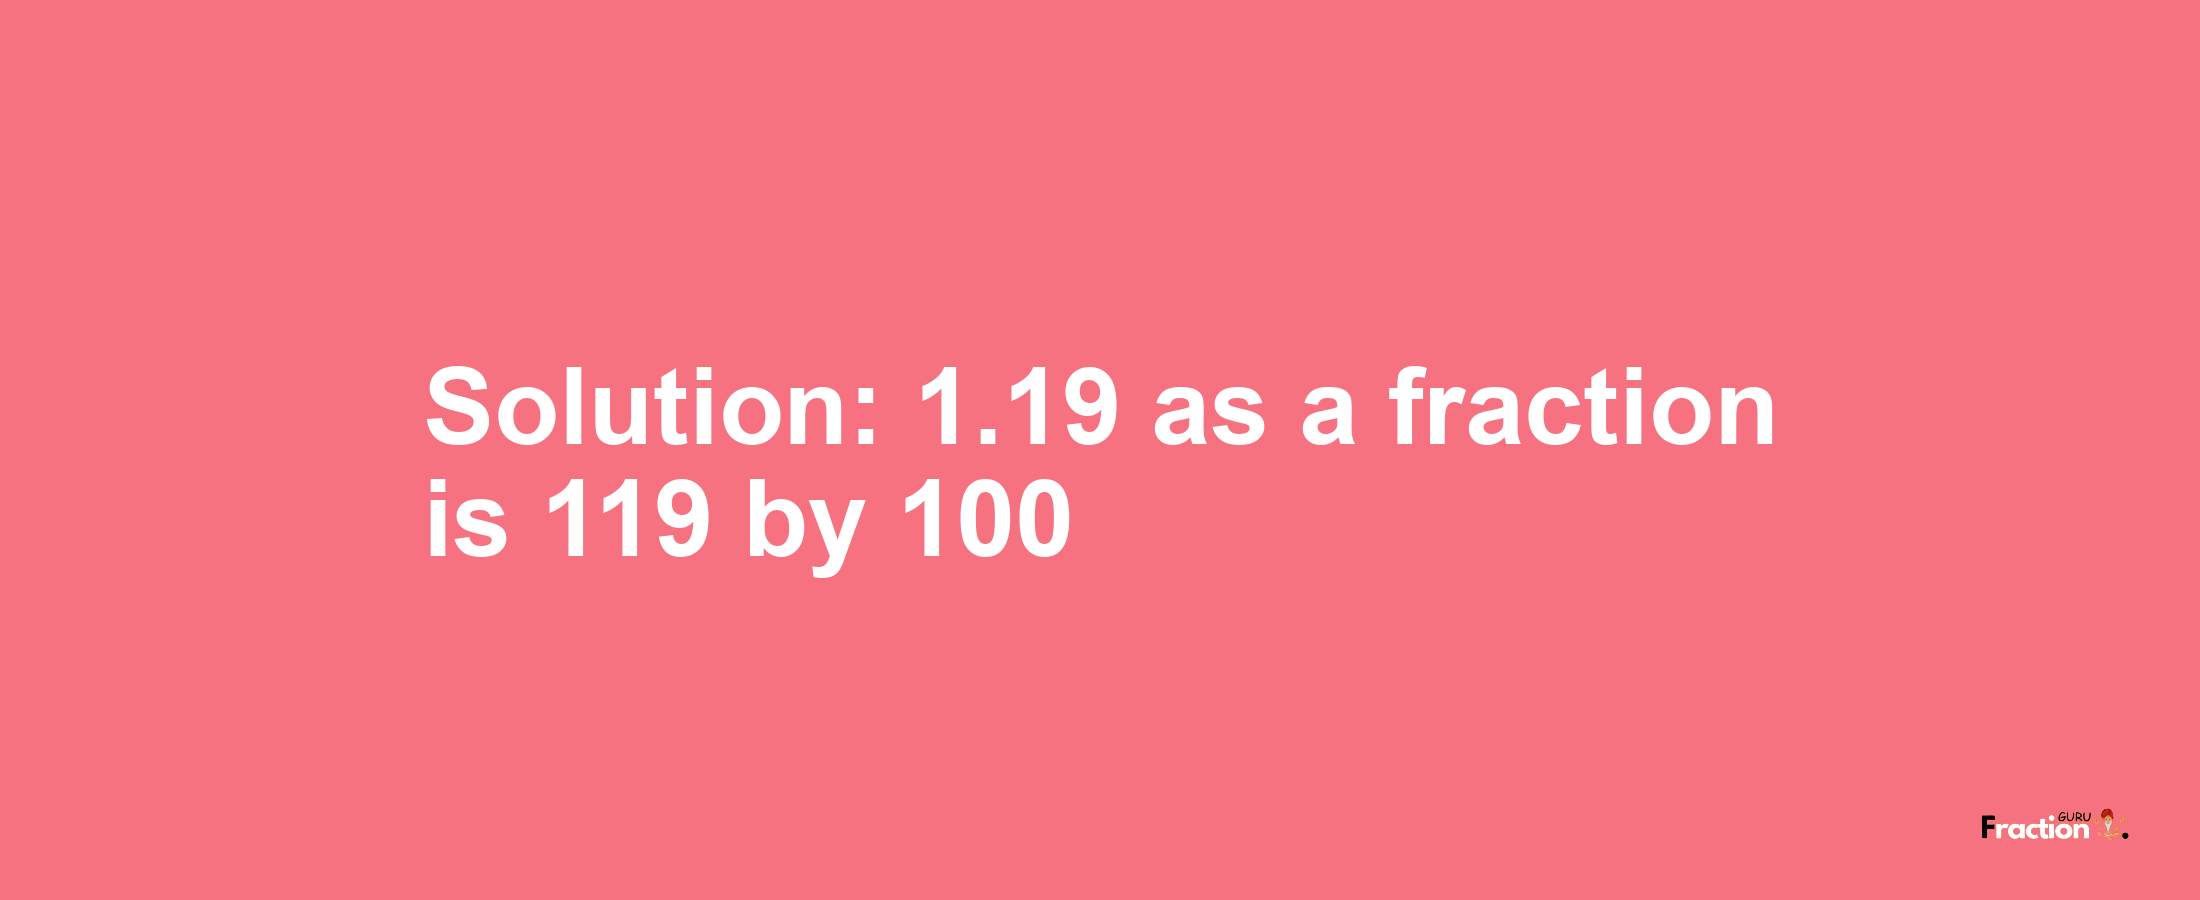 Solution:1.19 as a fraction is 119/100